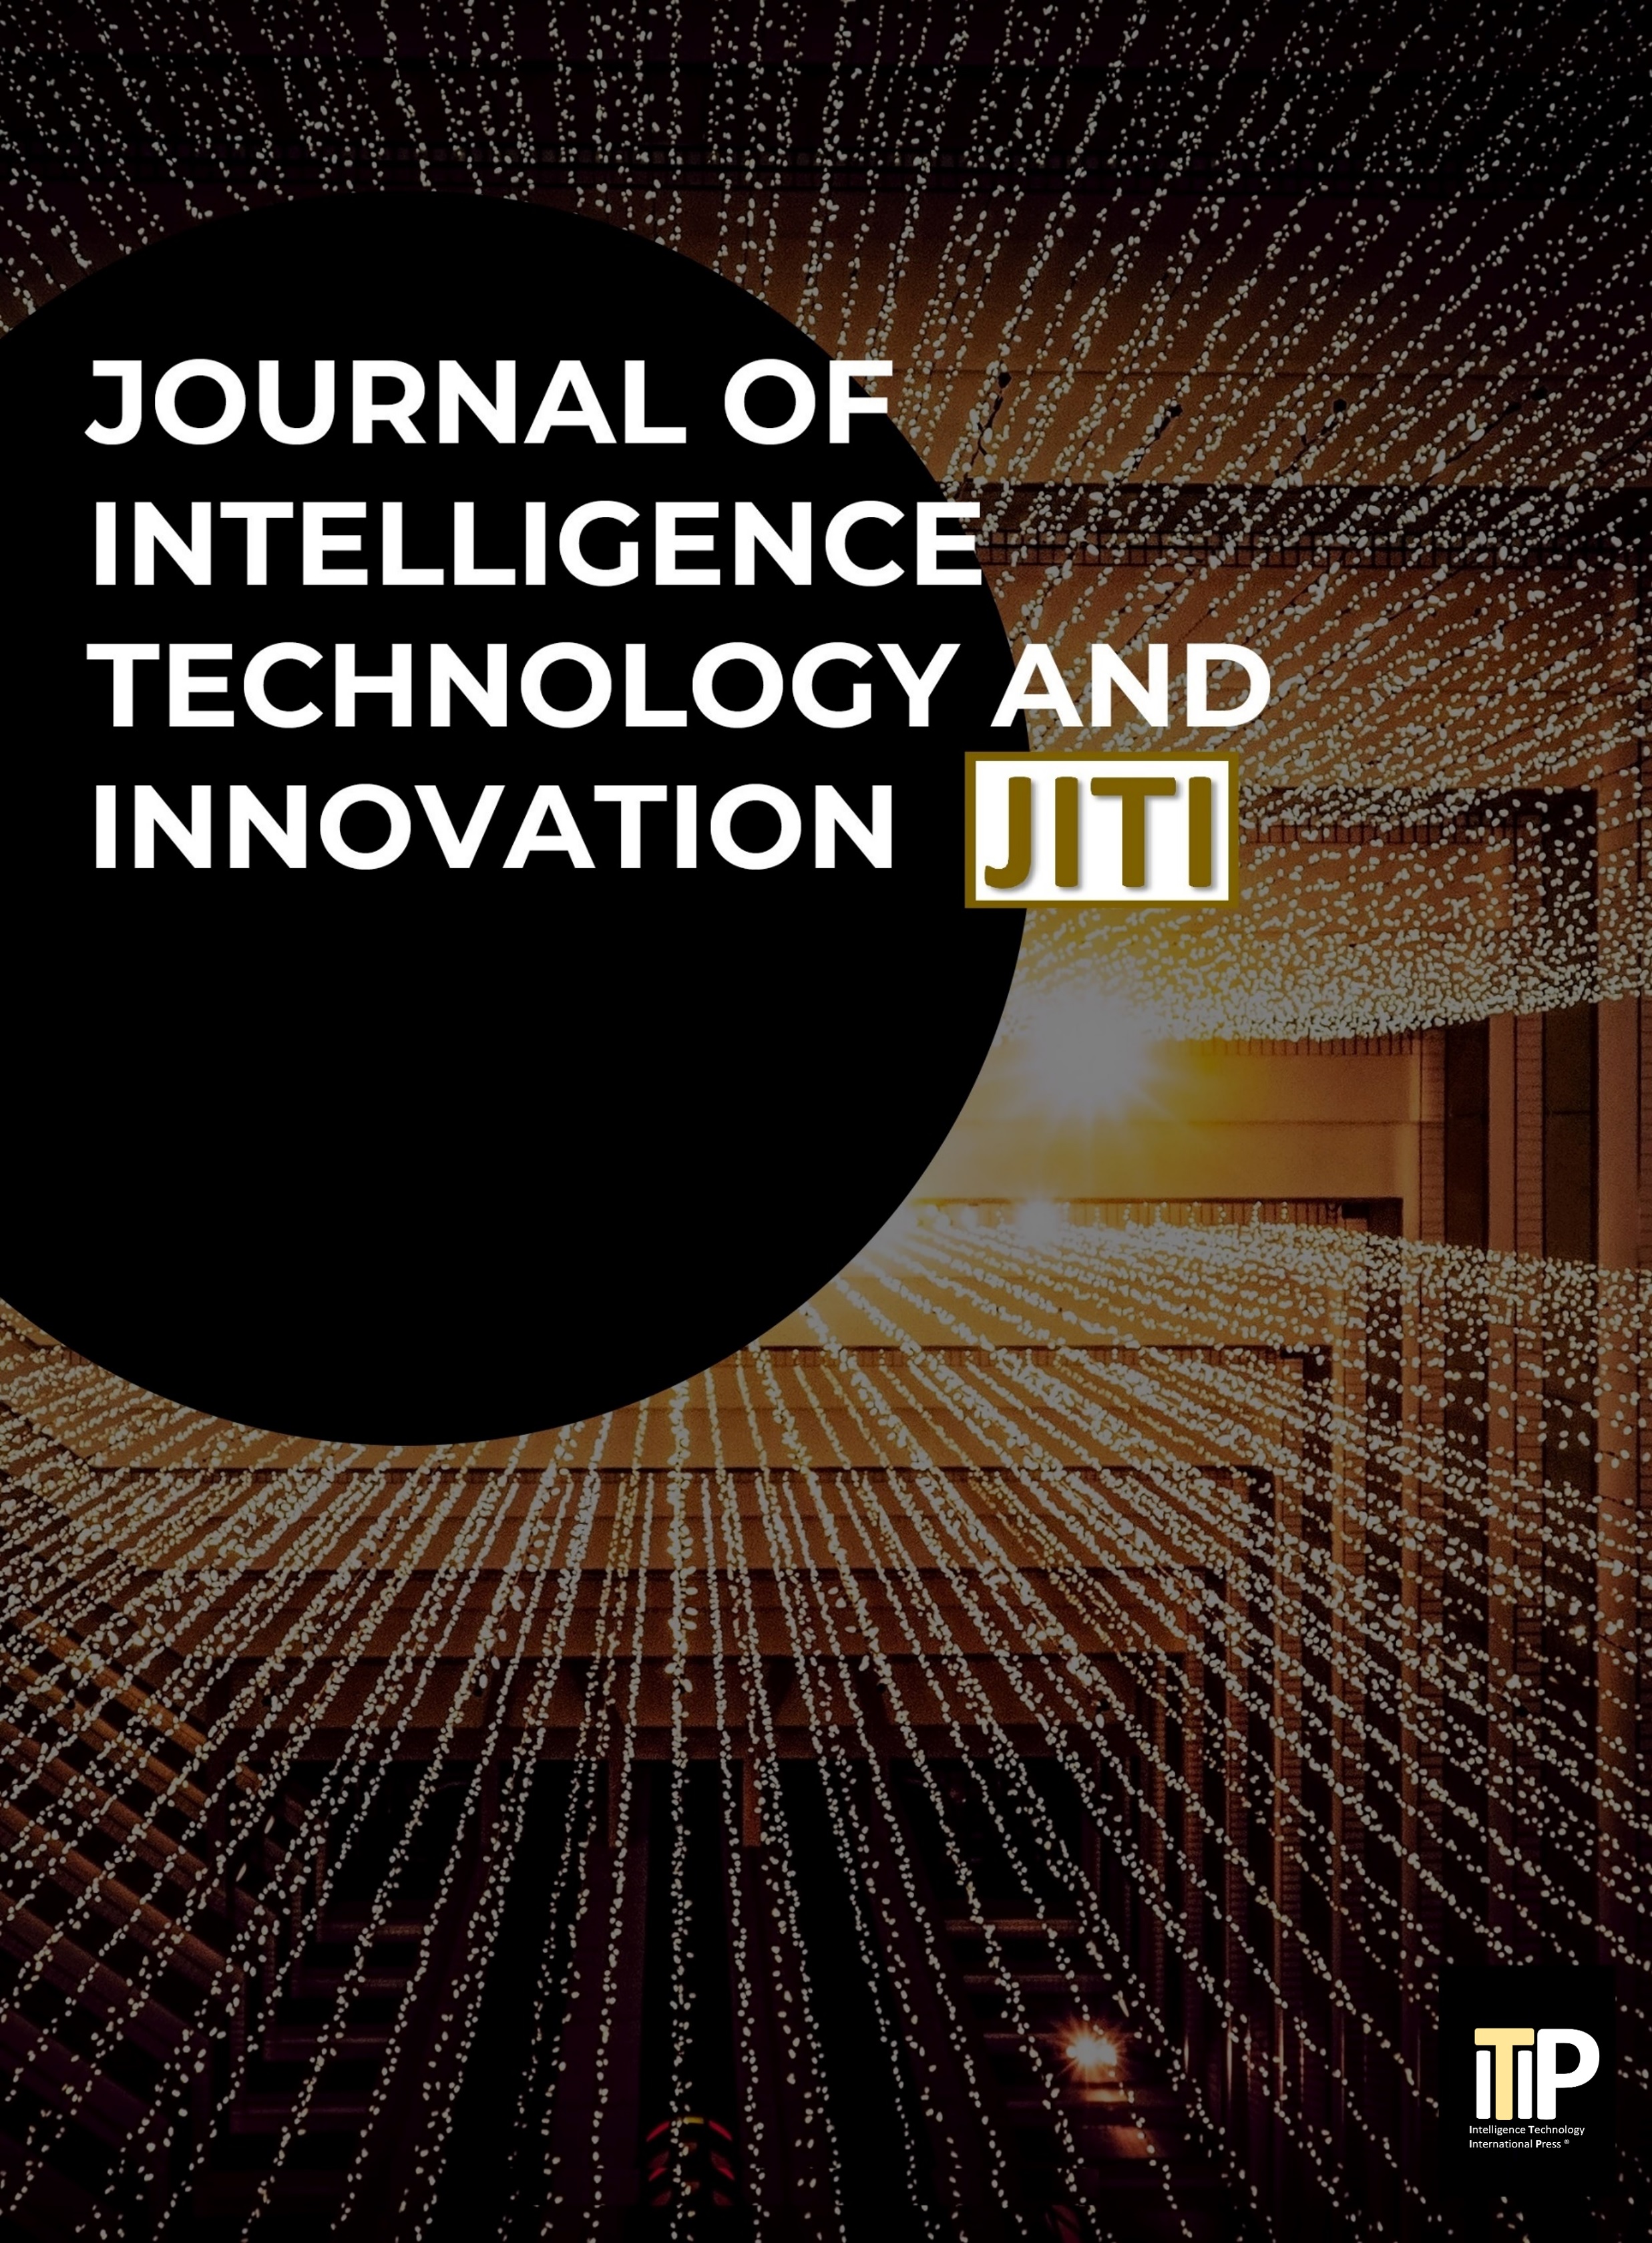 Journal of Intelligence Technology and Innovation